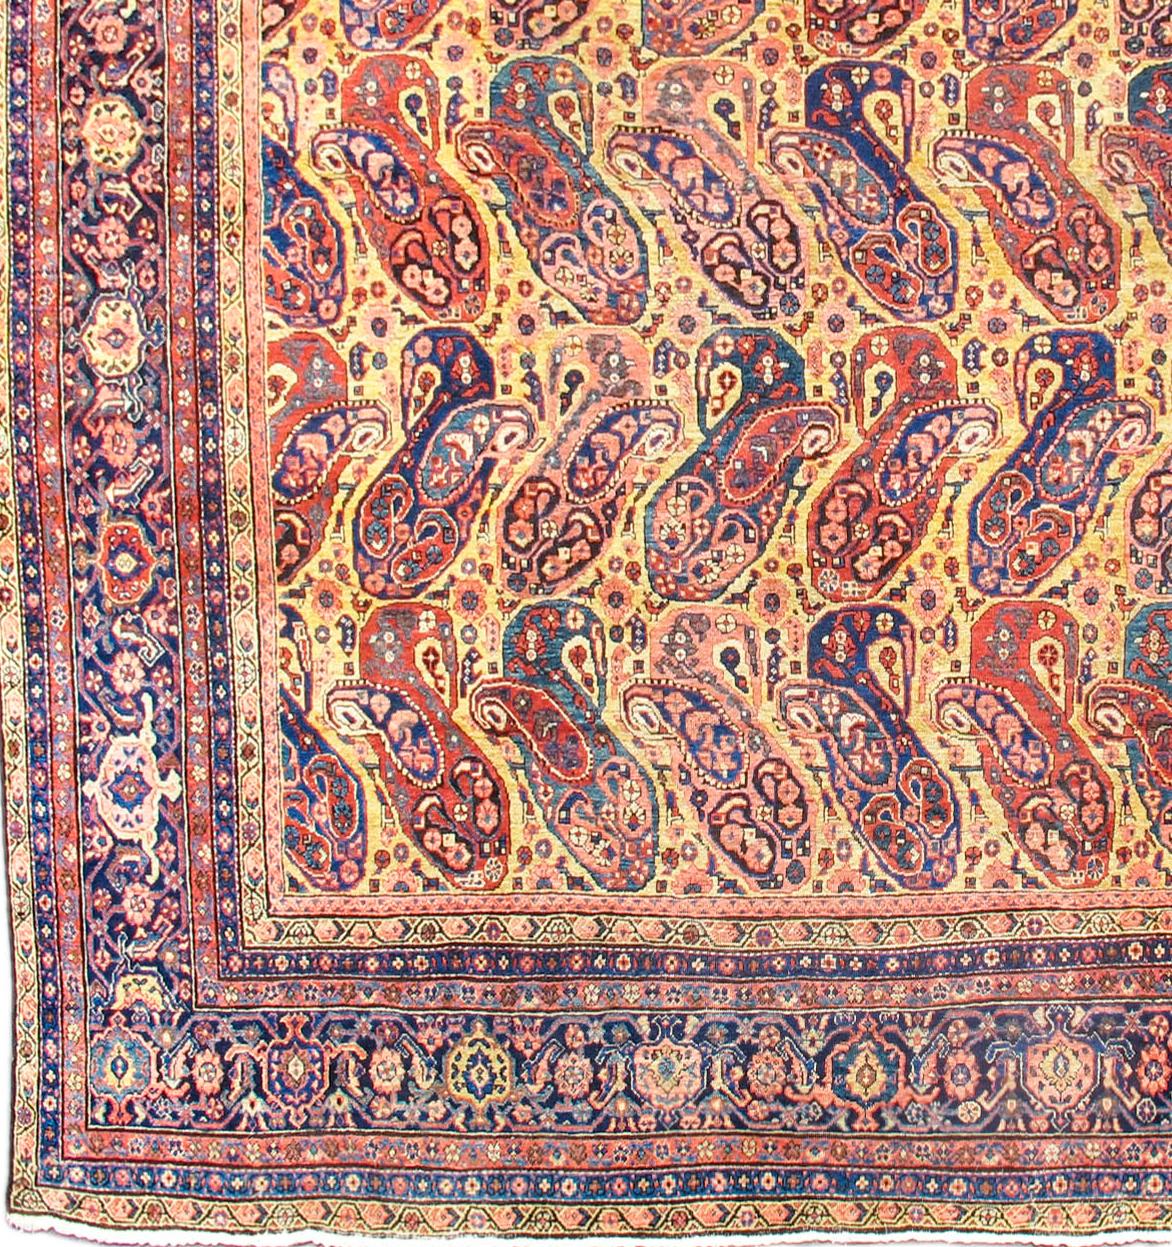 Antique Persian Fereghan Carpet, Late 19th Century

In the manner of a fine Persian shawl, this splendid Fereghan carpet draws rows of elegant paisley clusters throughout its field. Color is superb and lively and includes a particularly pleasing